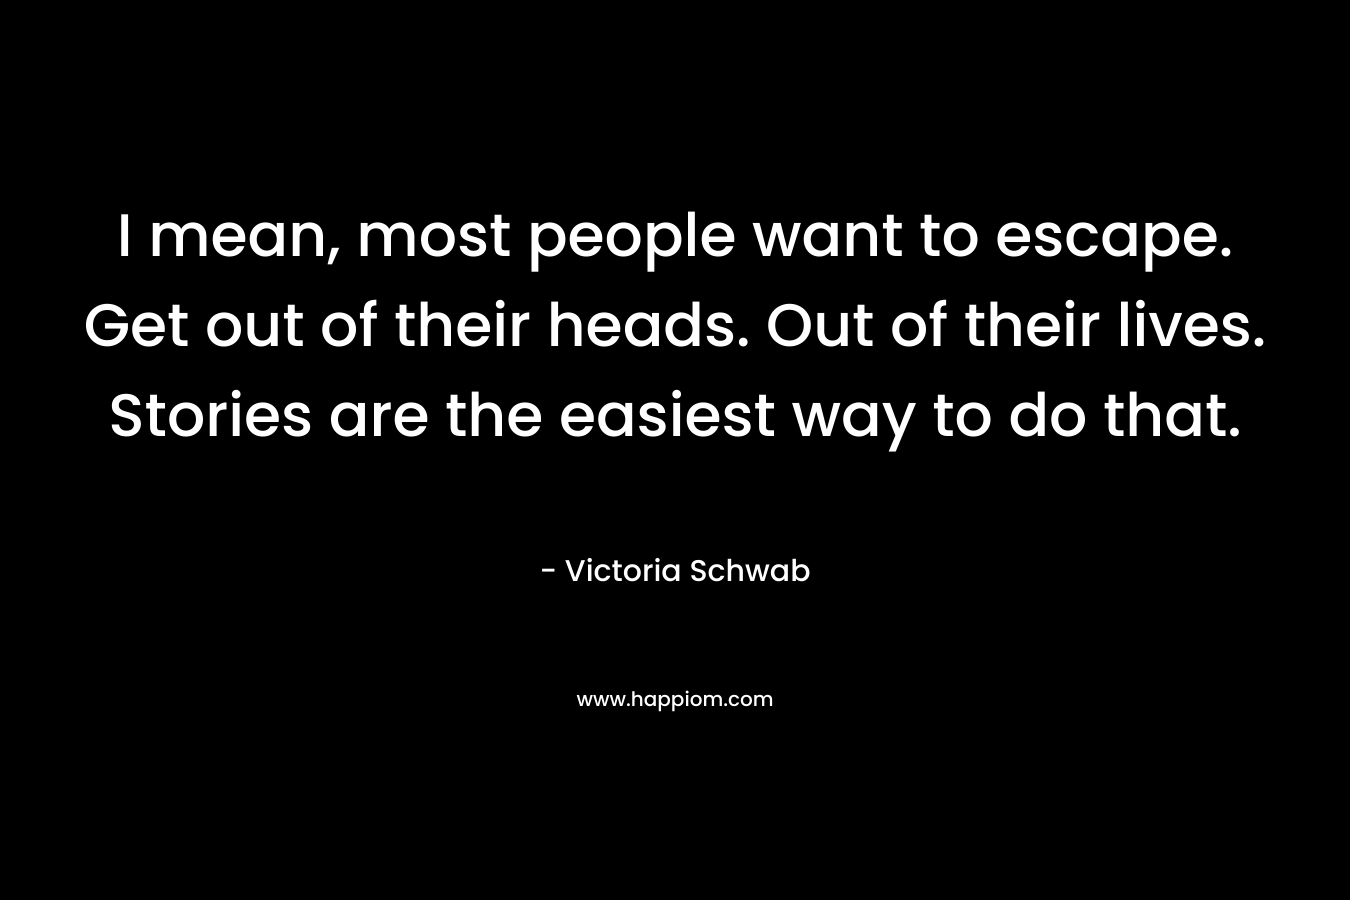 I mean, most people want to escape. Get out of their heads. Out of their lives. Stories are the easiest way to do that.